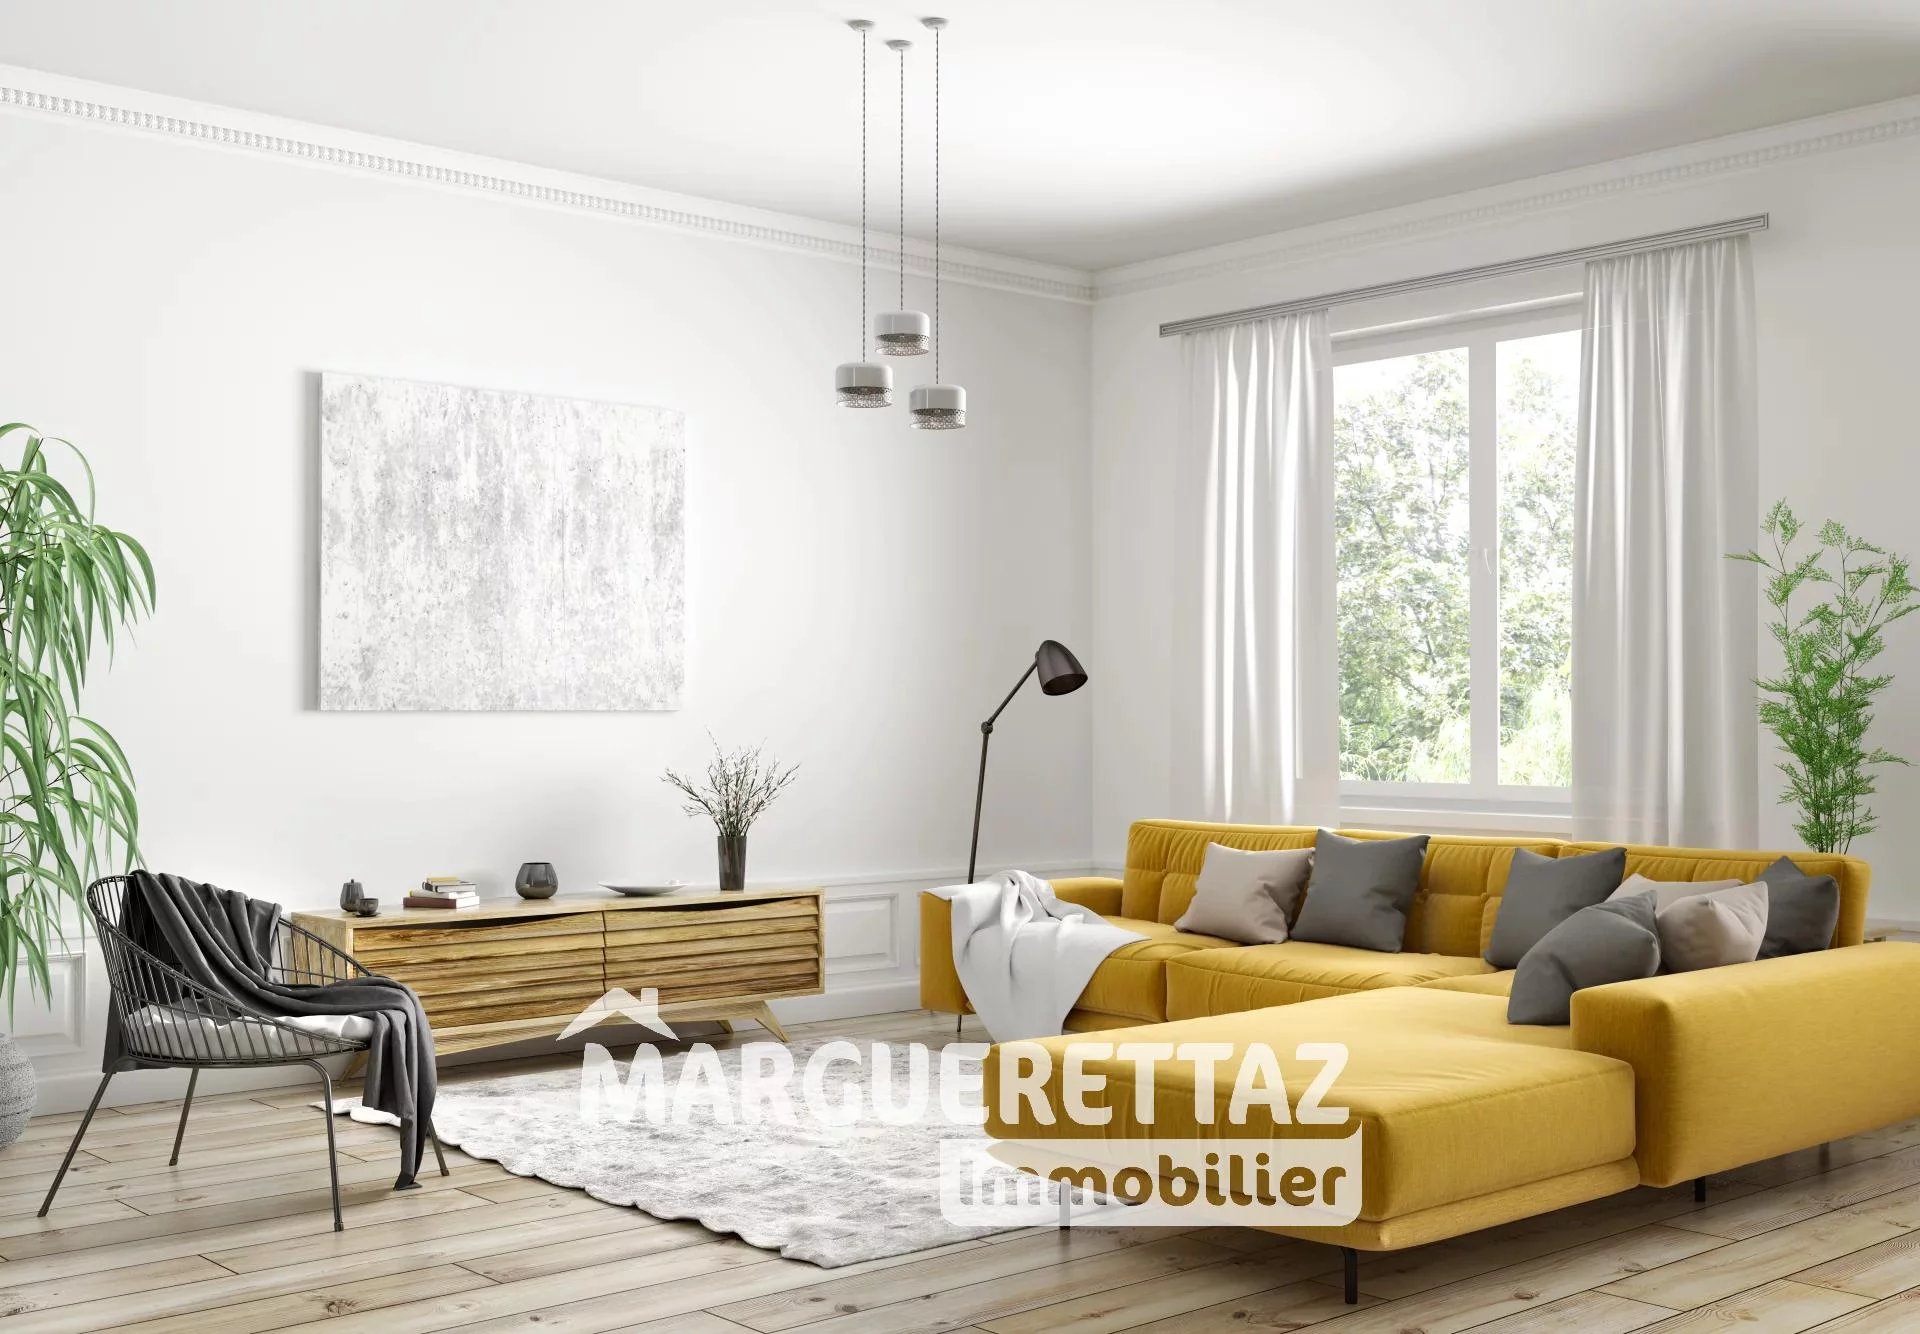 Modern interior design of scandinavian apartment, living room with yellow sofa, sideboard and black armchair 3d rendering